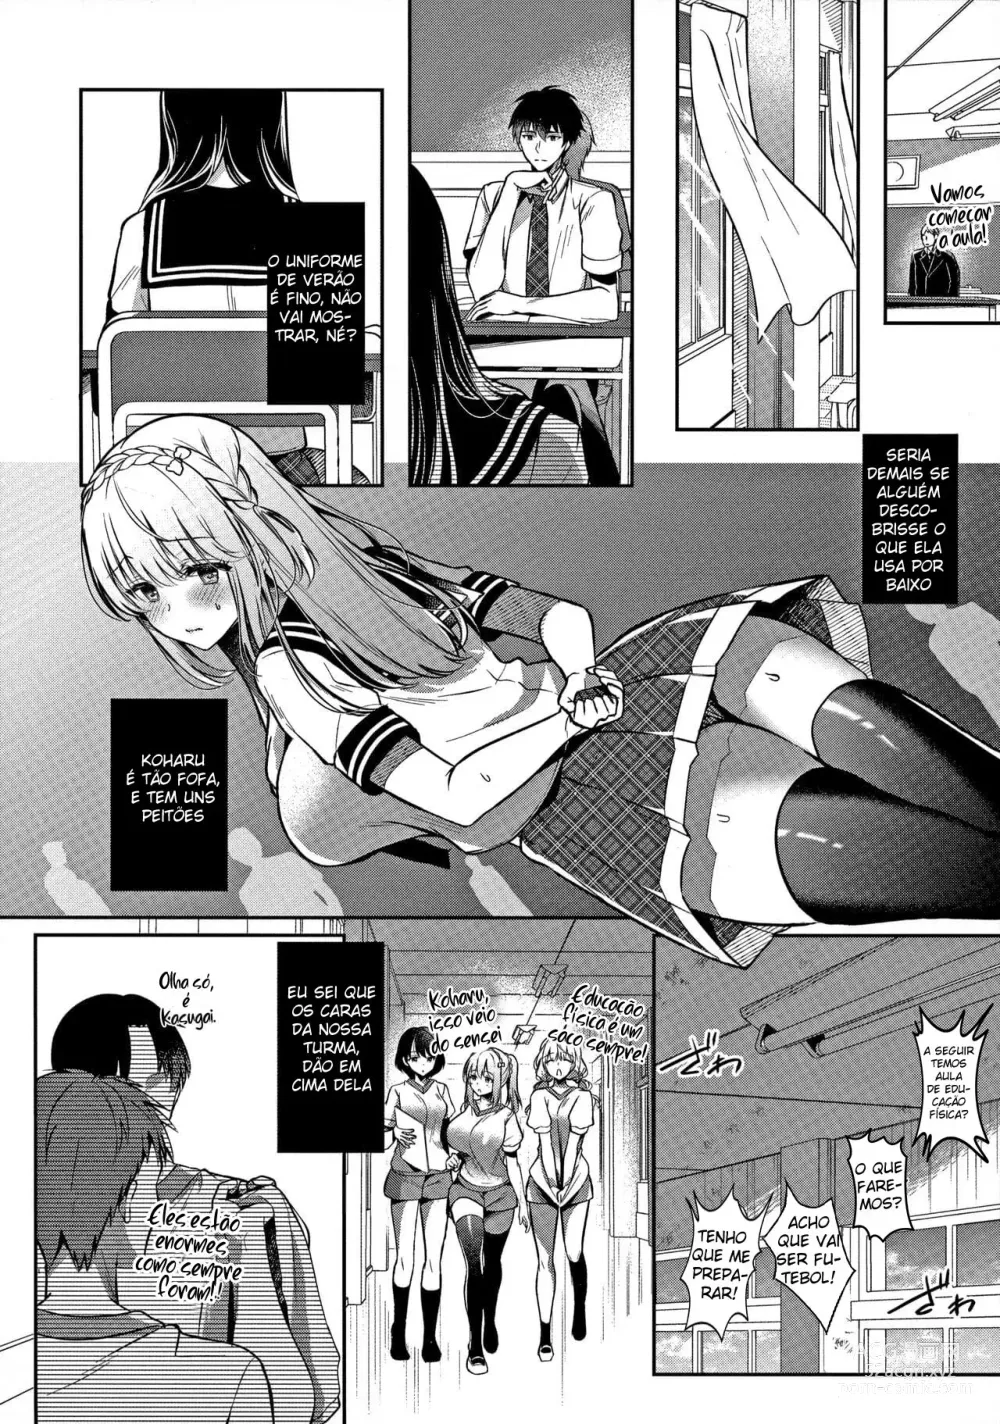 Page 19 of doujinshi My Childhood Friend Girlfriend and her sexy underwear